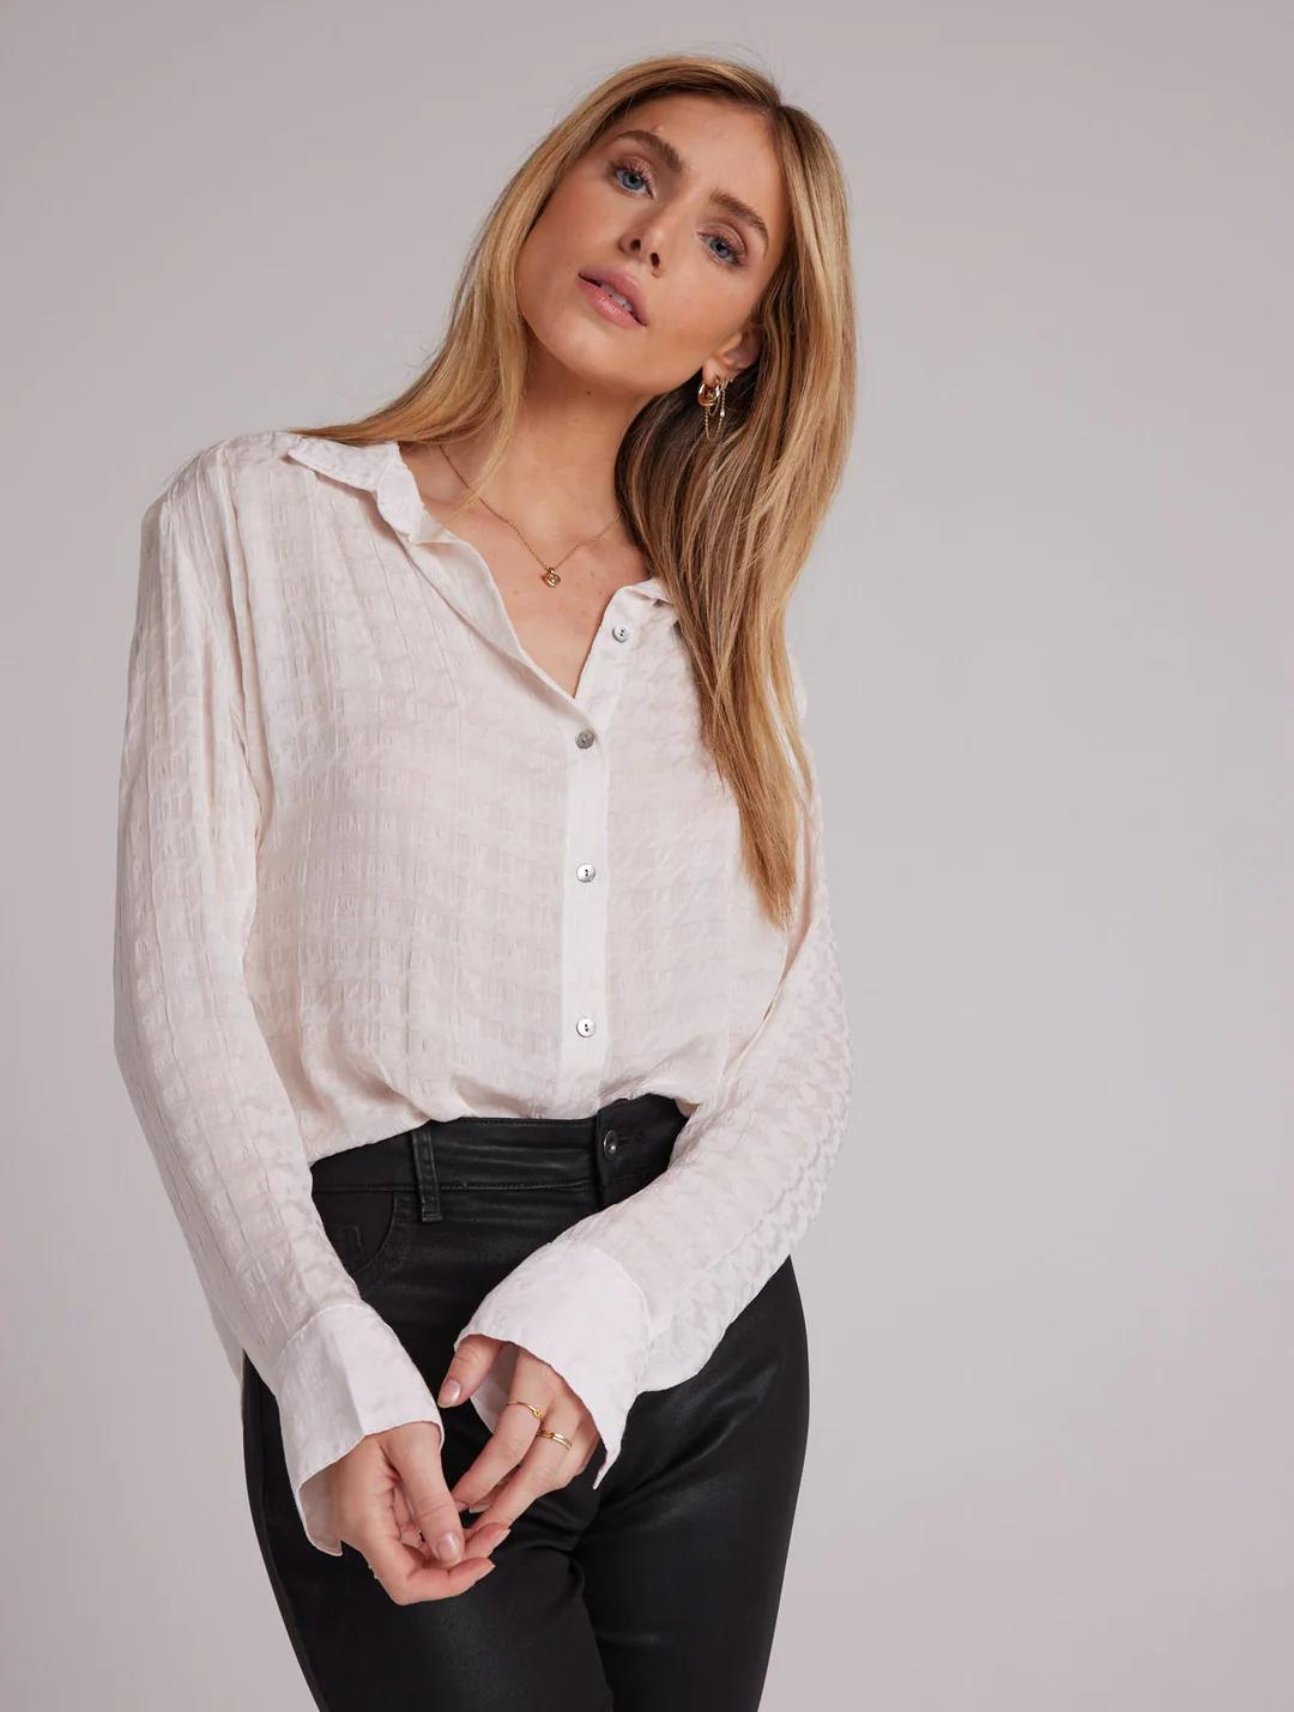 Pleated Button Down Shirt